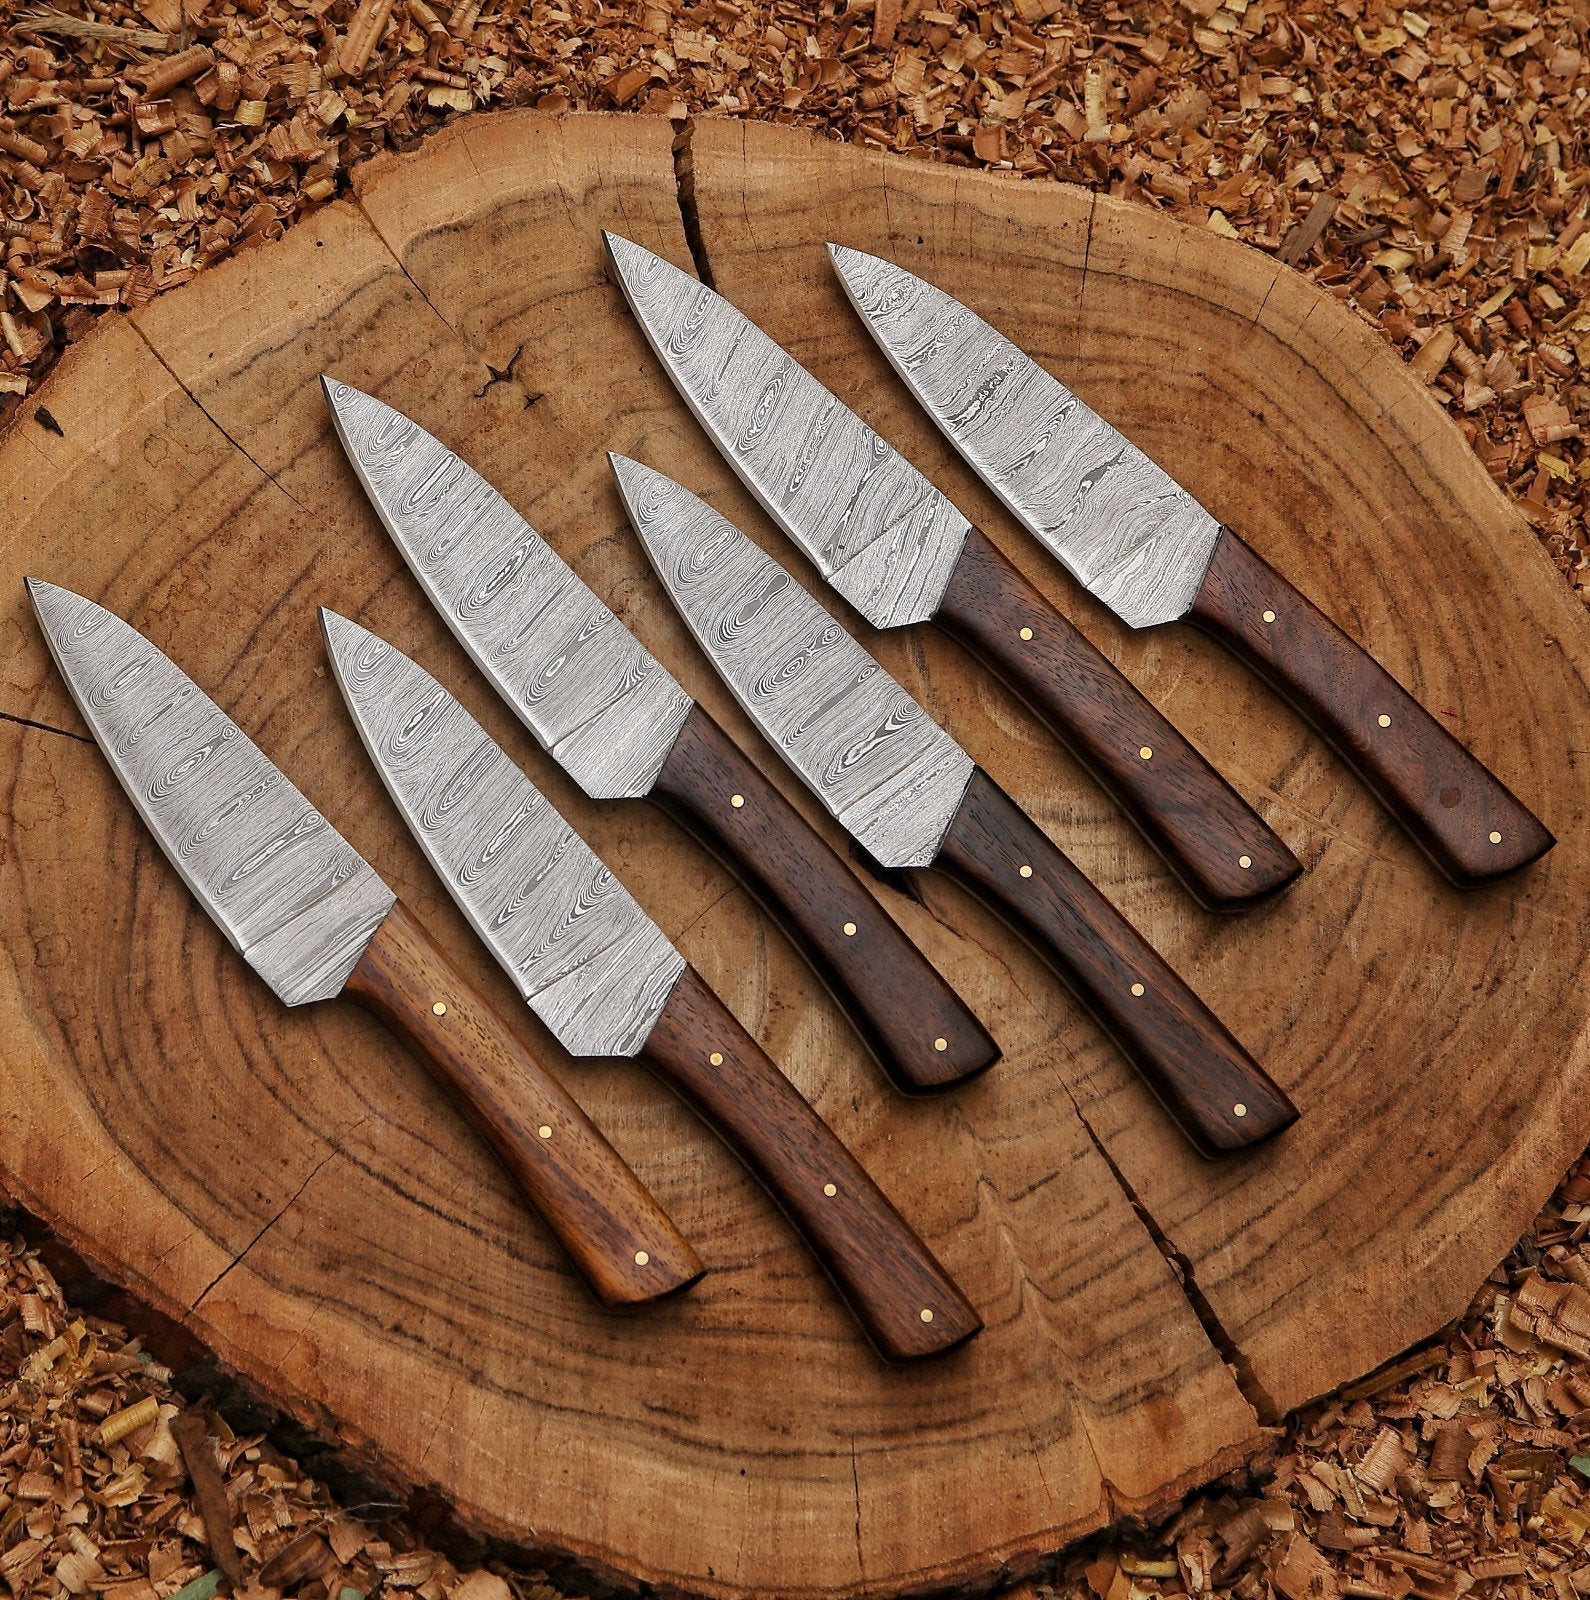 Exquisite Handmade Damascus Steel Steak Knives with Leather Sheath - Perfect Kitchen and BBQ Tools, Ideal Gift for Him, Unique Christmas or Anniversary Present - Premium best Happy Valentine Day gift from SCORPION KART - Just $150! Shop now at SCORPION KART